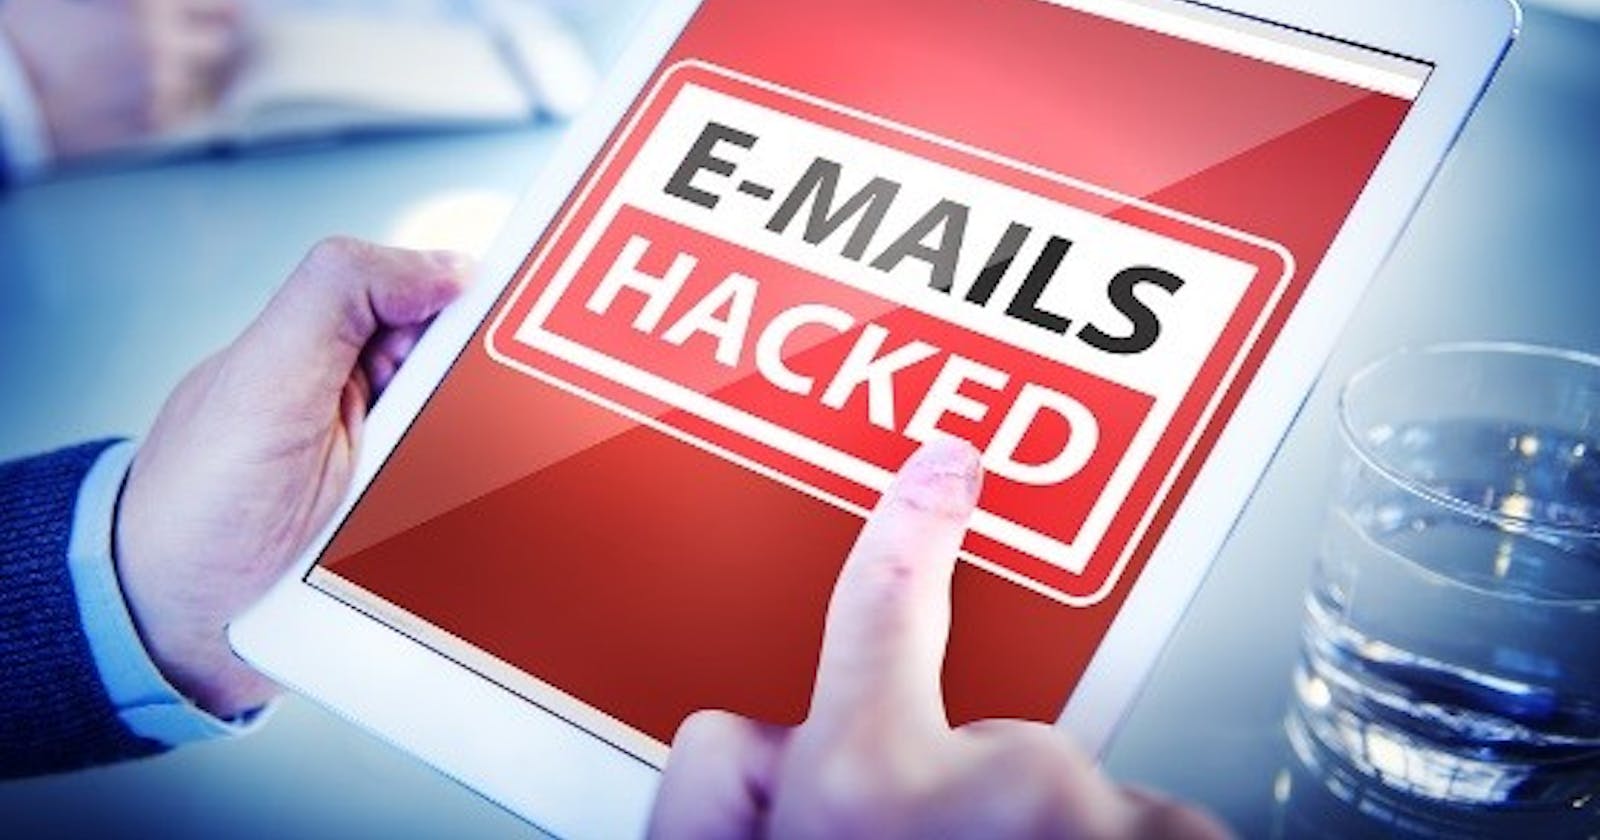 👨‍💻What to Do if Your Email Account Gets Hacked🗳